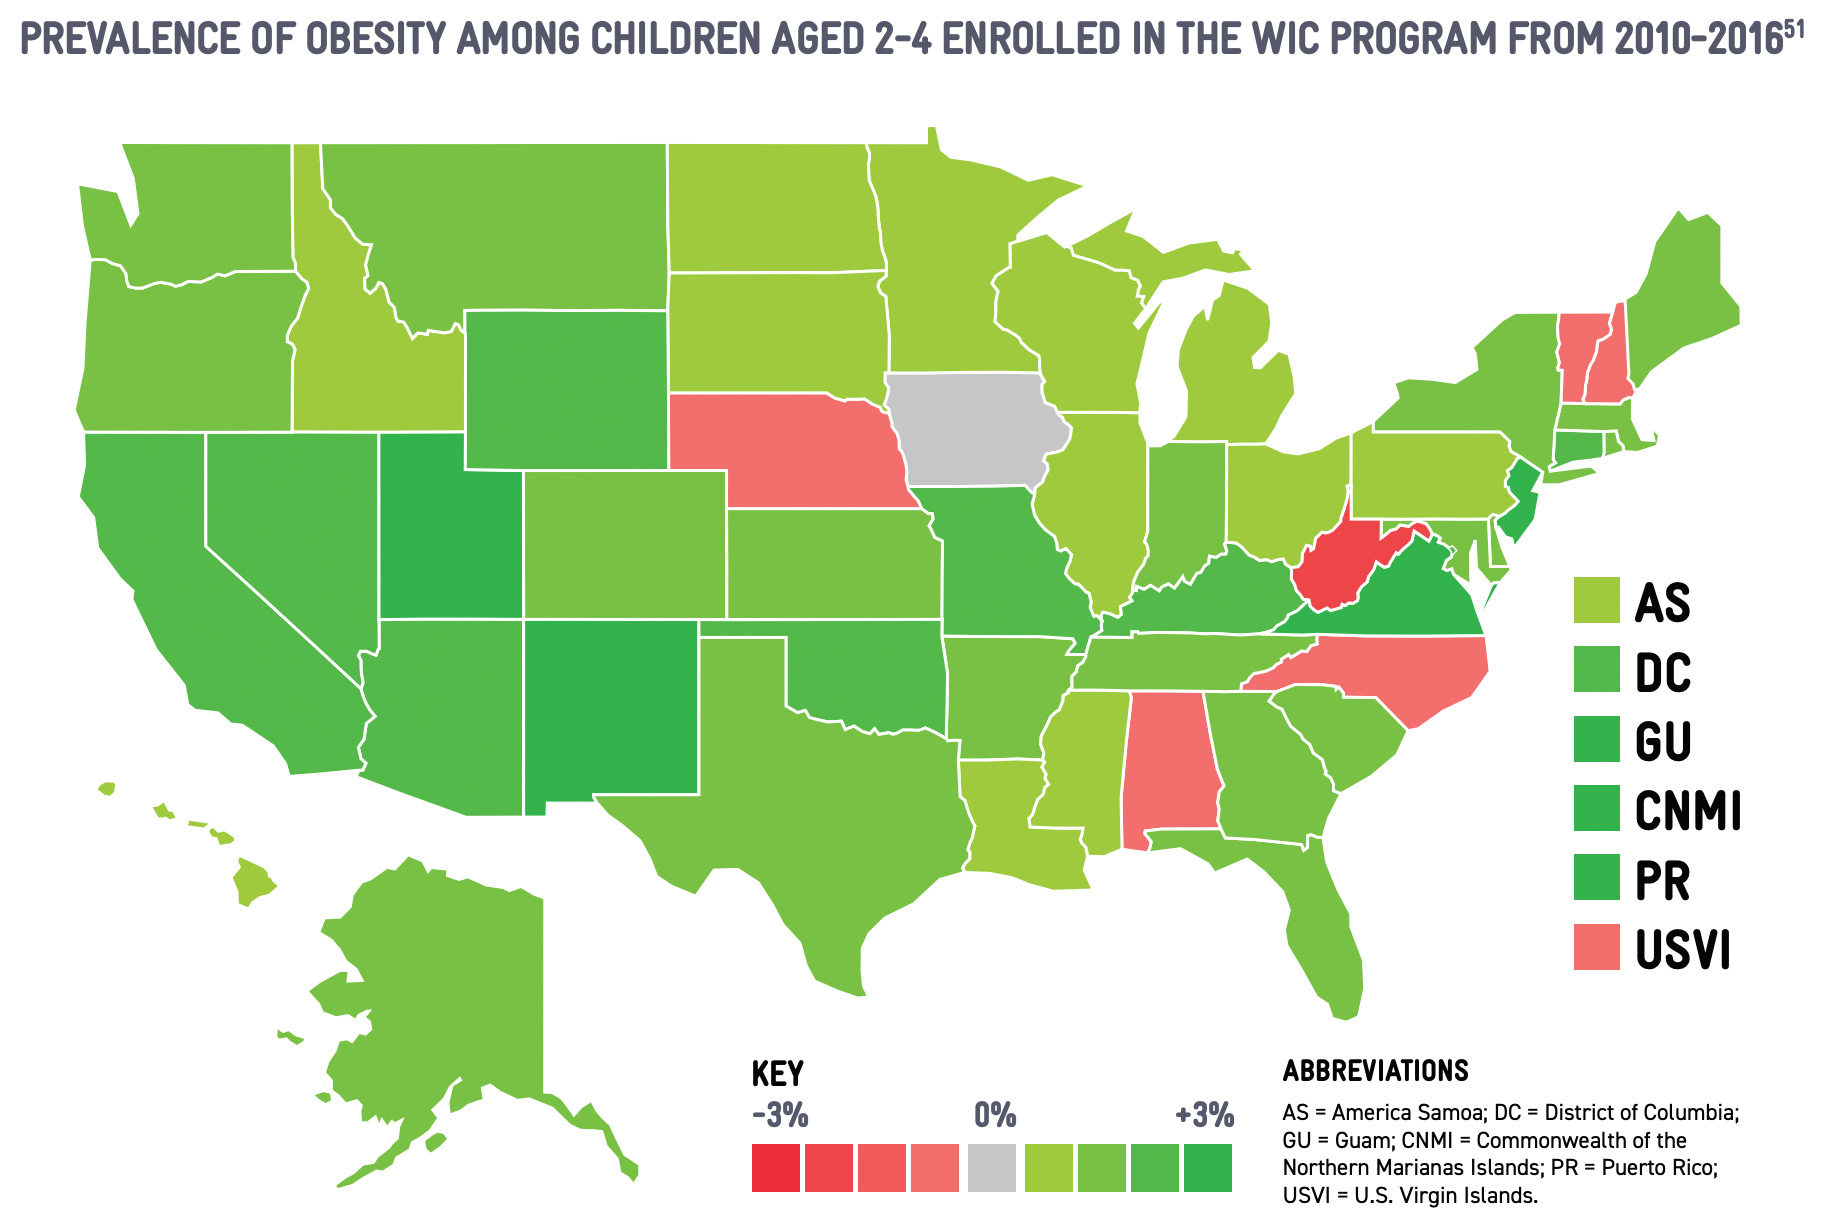 Prevalence of Obesity Among Children Aged 2-4 Enrolled in WIC